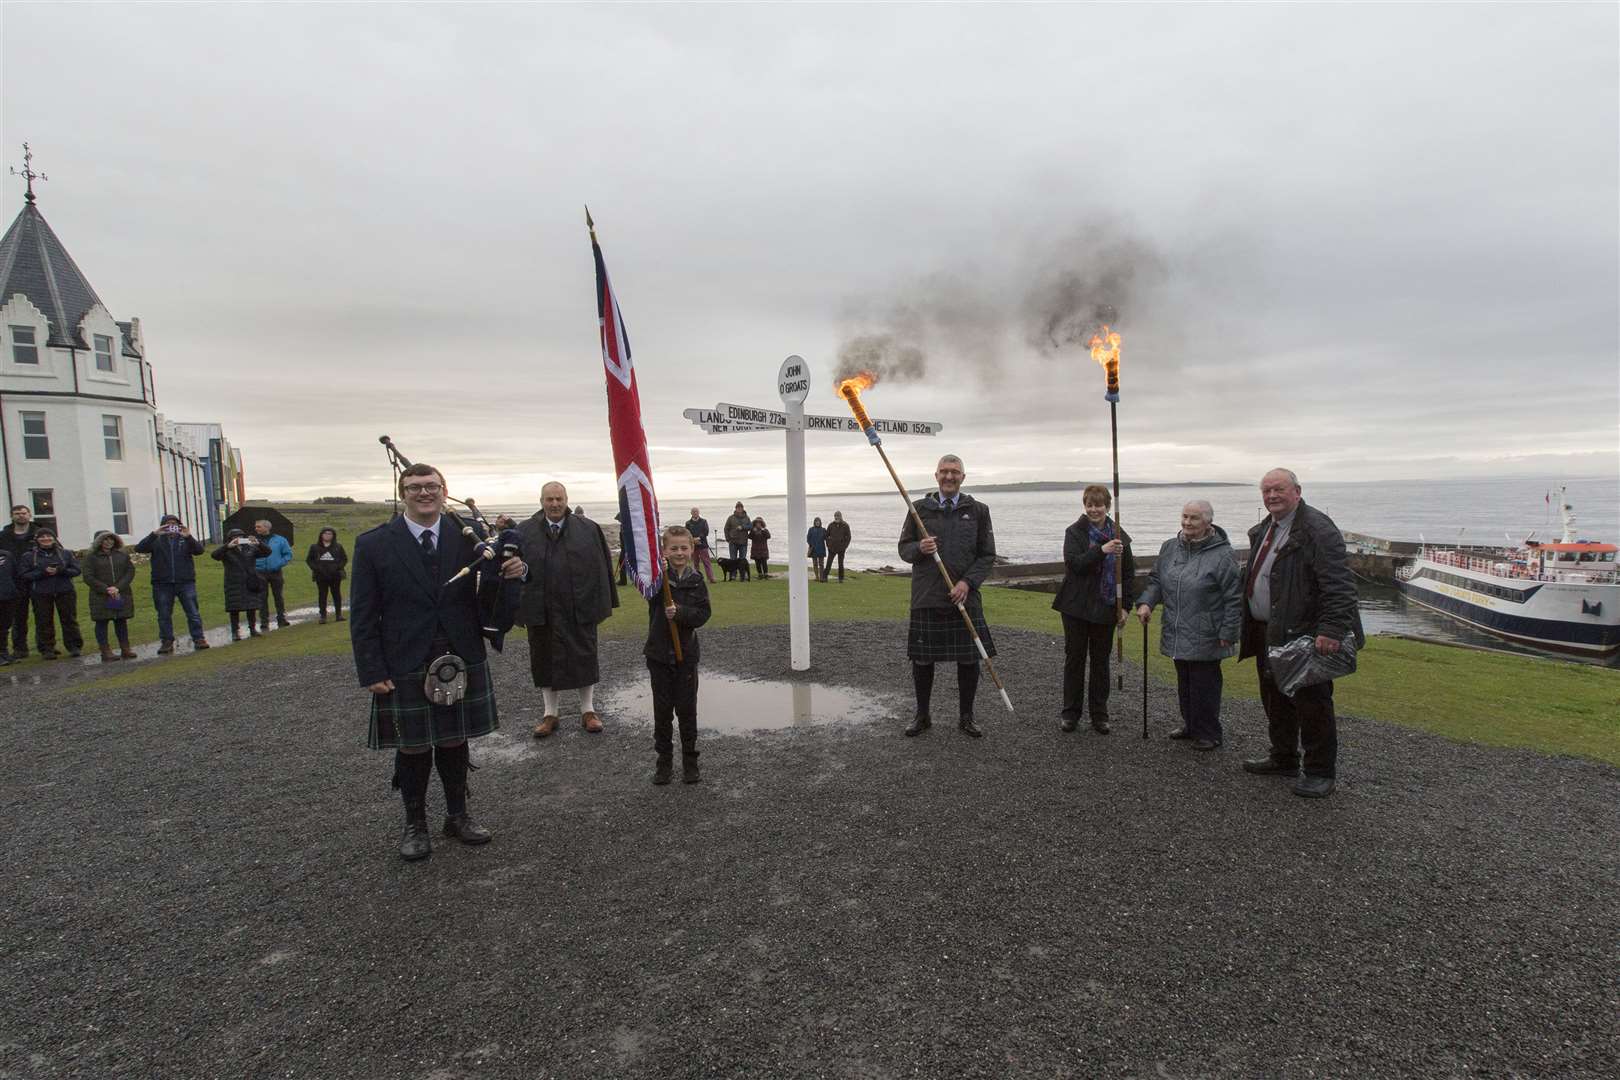 Torch-bearers and others involved in the beacon procession get ready to set off from the John O'Groats signpost. Picture: Robert MacDonald / Northern Studios